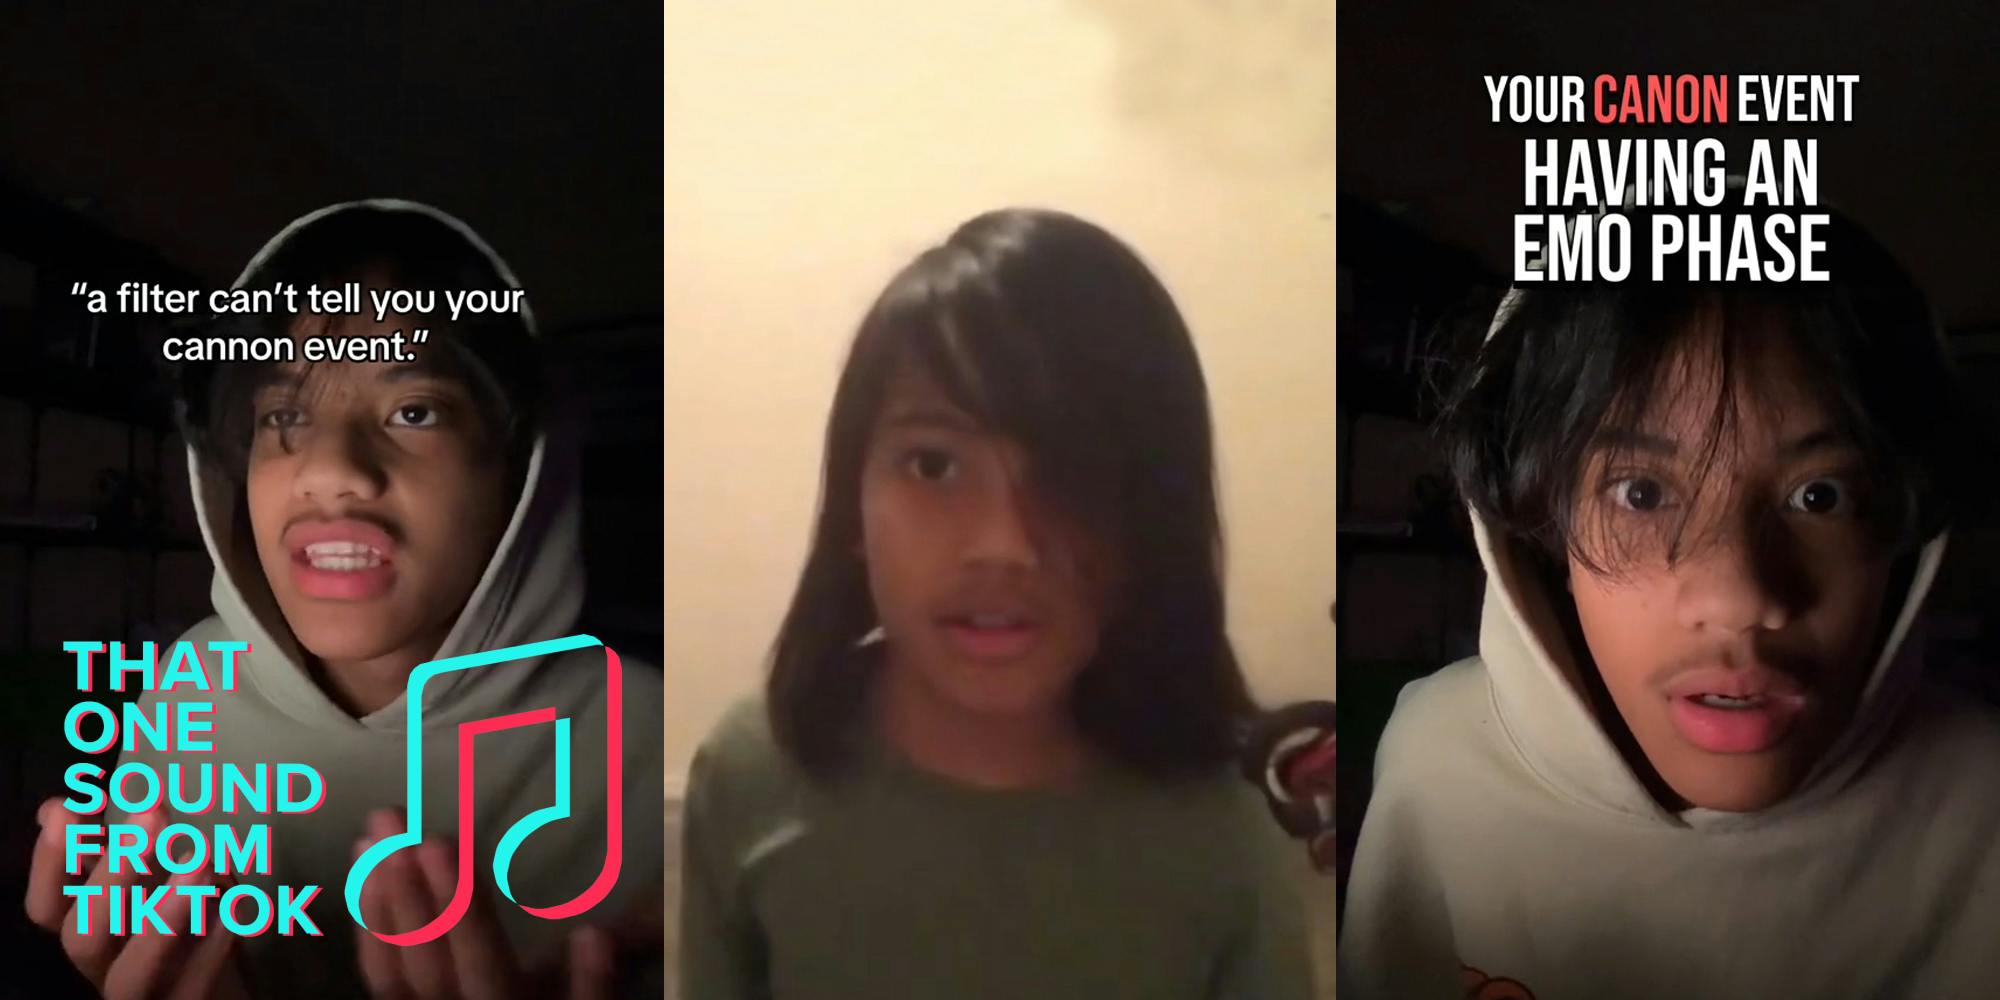 man with caption ""a filter can't tell you your cannon event"" with THAT ONE SOUND FROM TIKTOK logo in bottom left corner (l) kid with emo haircut in front of tan background (c) man with caption "YOUR CANNON EVENT HAVING AN EMO PHASE" (r)